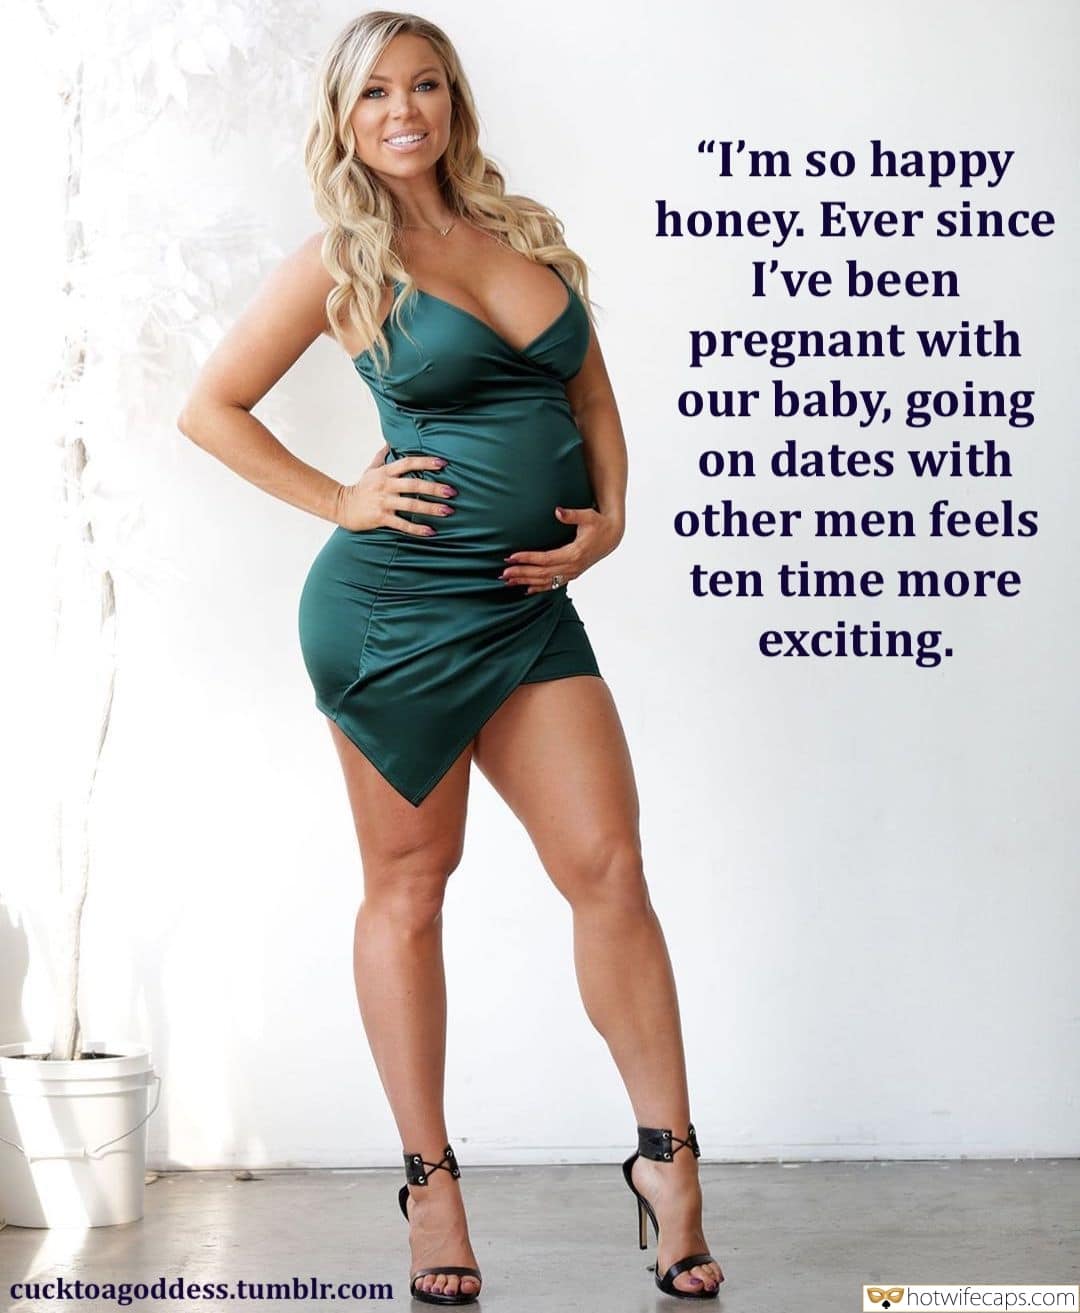 Sexy Memes Humiliation hotwife caption: “I’m so happy honey. Ever since I’ve been pregnant with our baby, going on dates with other men feels ten time more exciting. cucktoagoddess.tumblr.com Molesting pregnant mom baby caption porn Voluptuous Pregnant Blonde in Green Dress